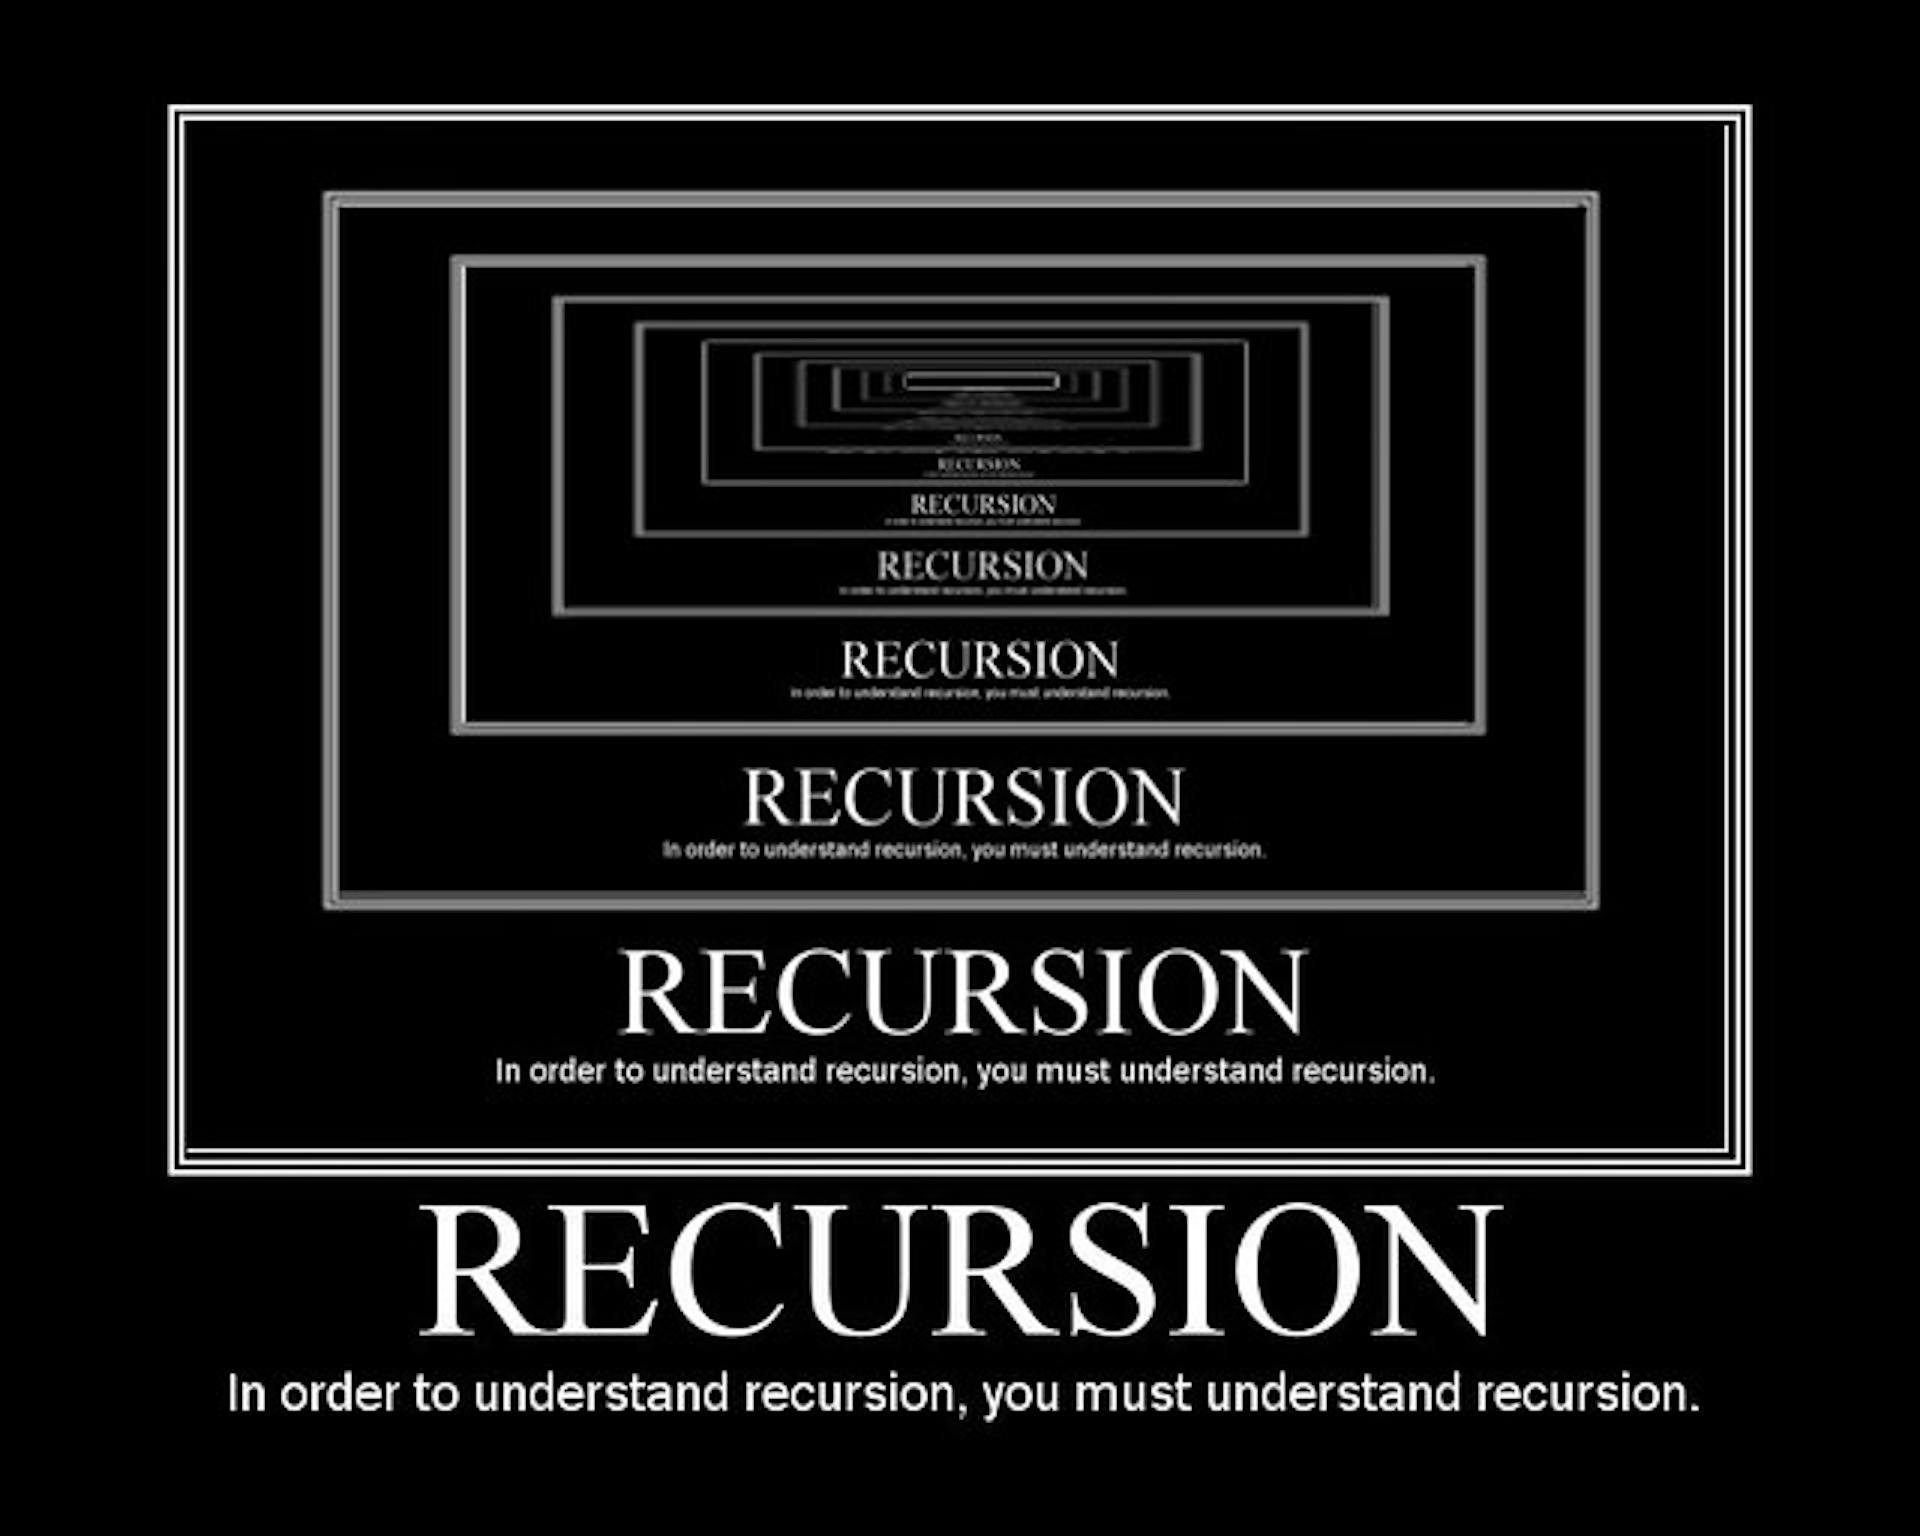 featured image - Recursion Can Be Weirder Than You Think